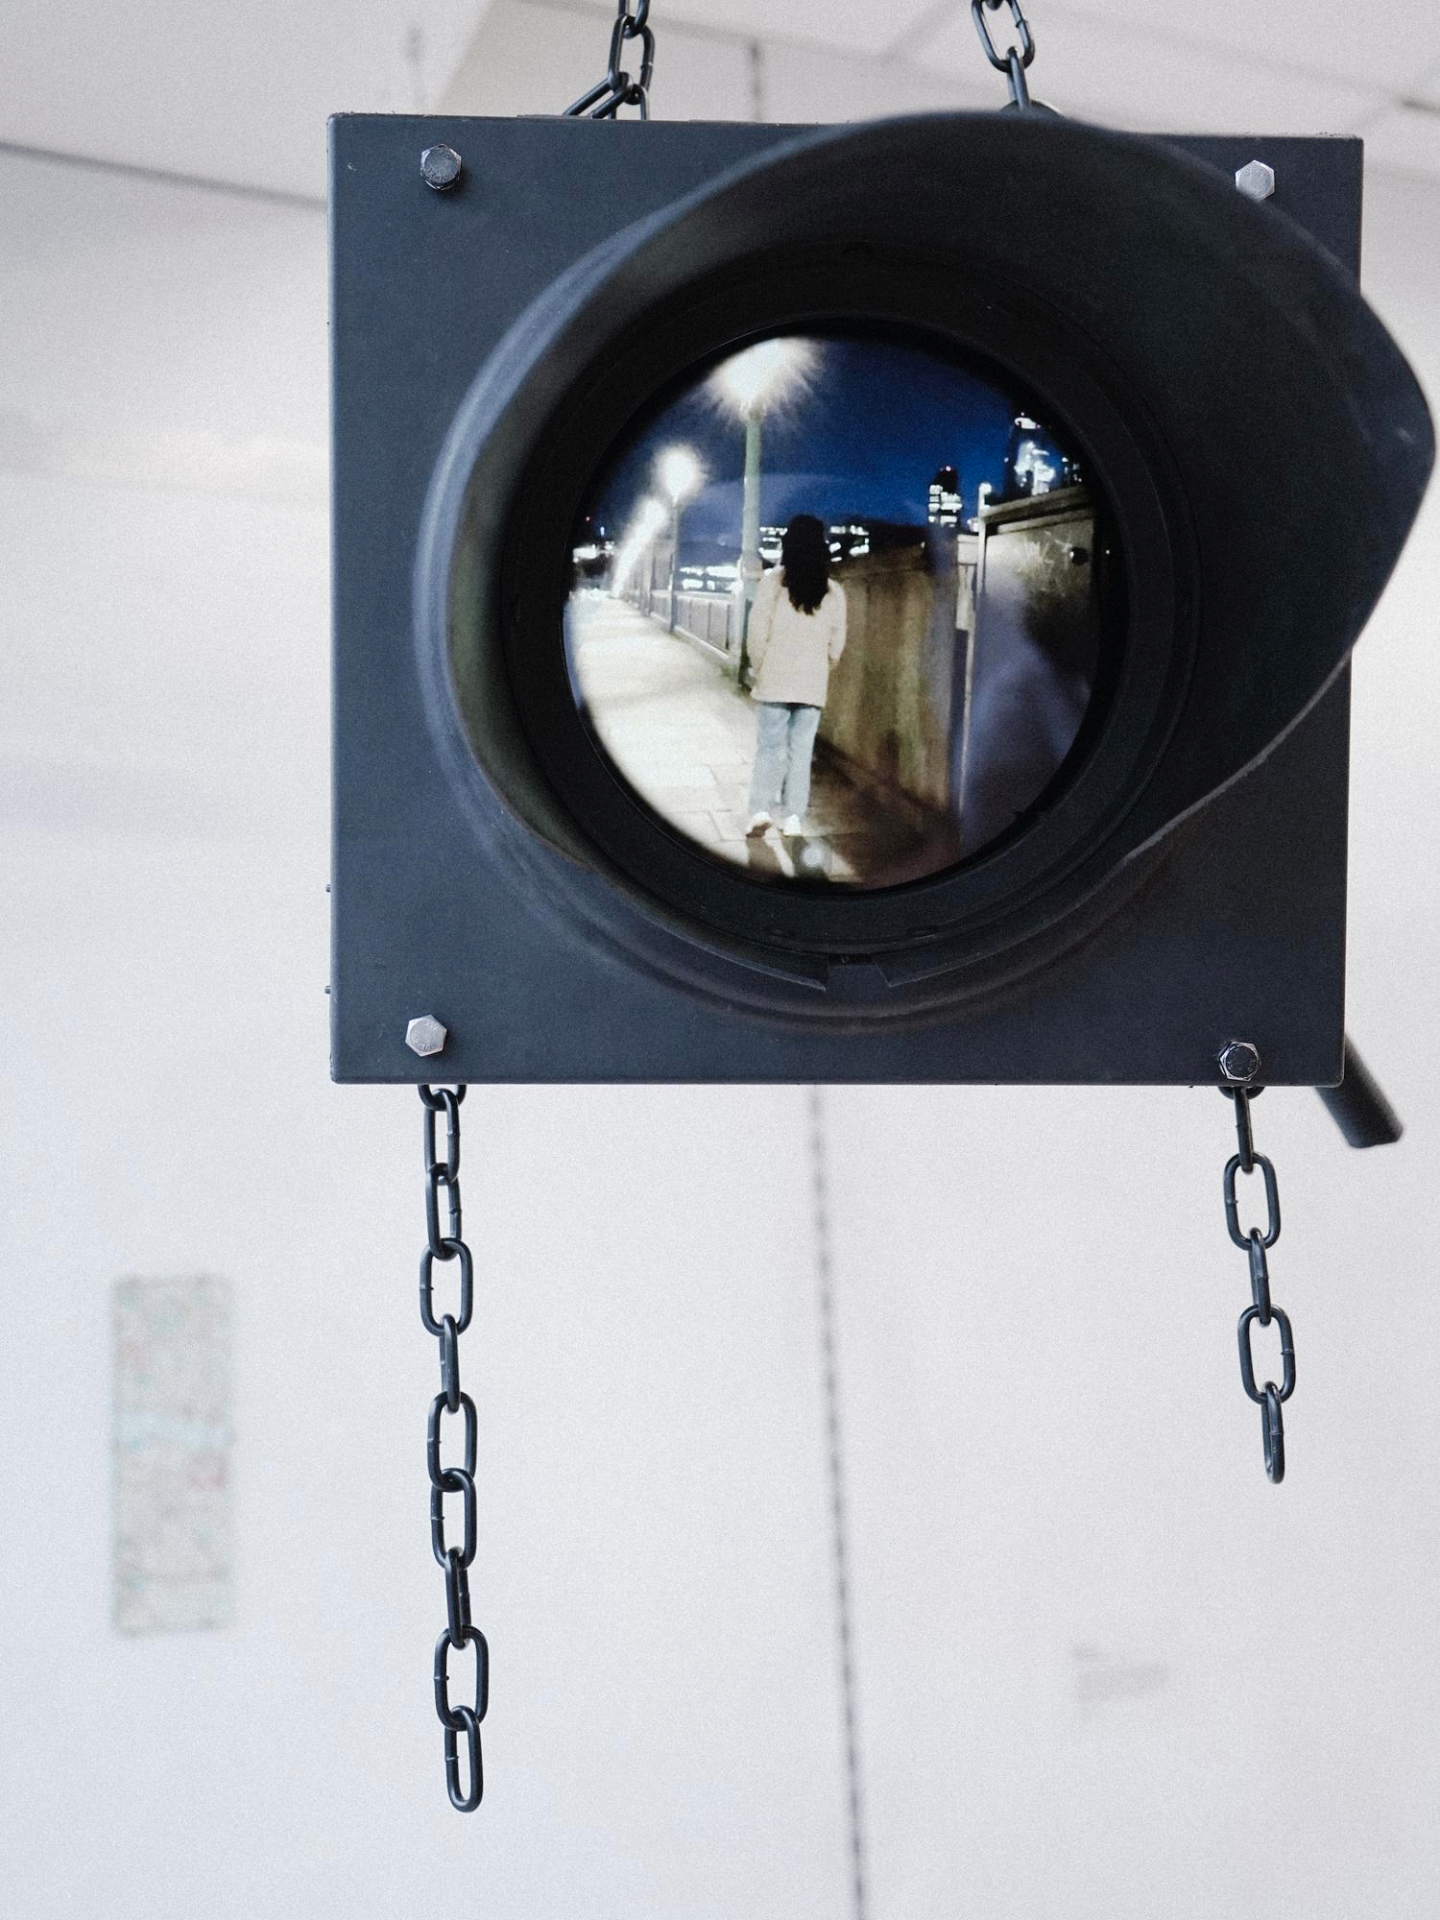 An image of a video screen inside a repurposed traffic light, hanging from black chains in a white room.